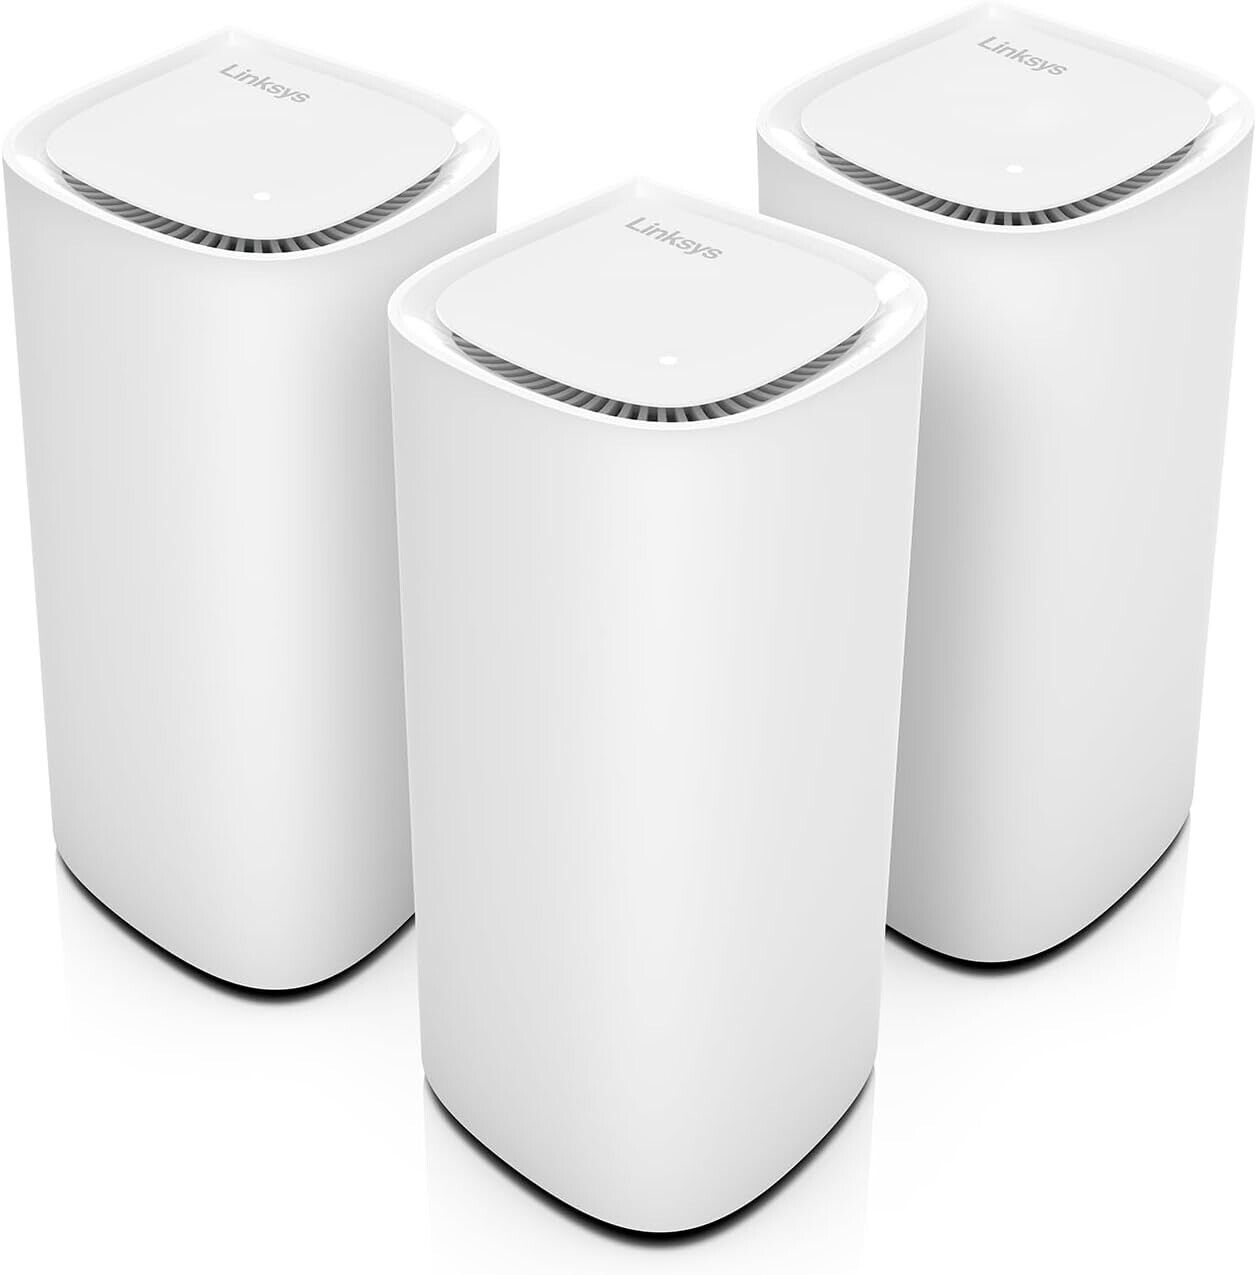 Linksys Velop Pro 7 WiFi Mesh System (MBE7003) 3-Pack Router